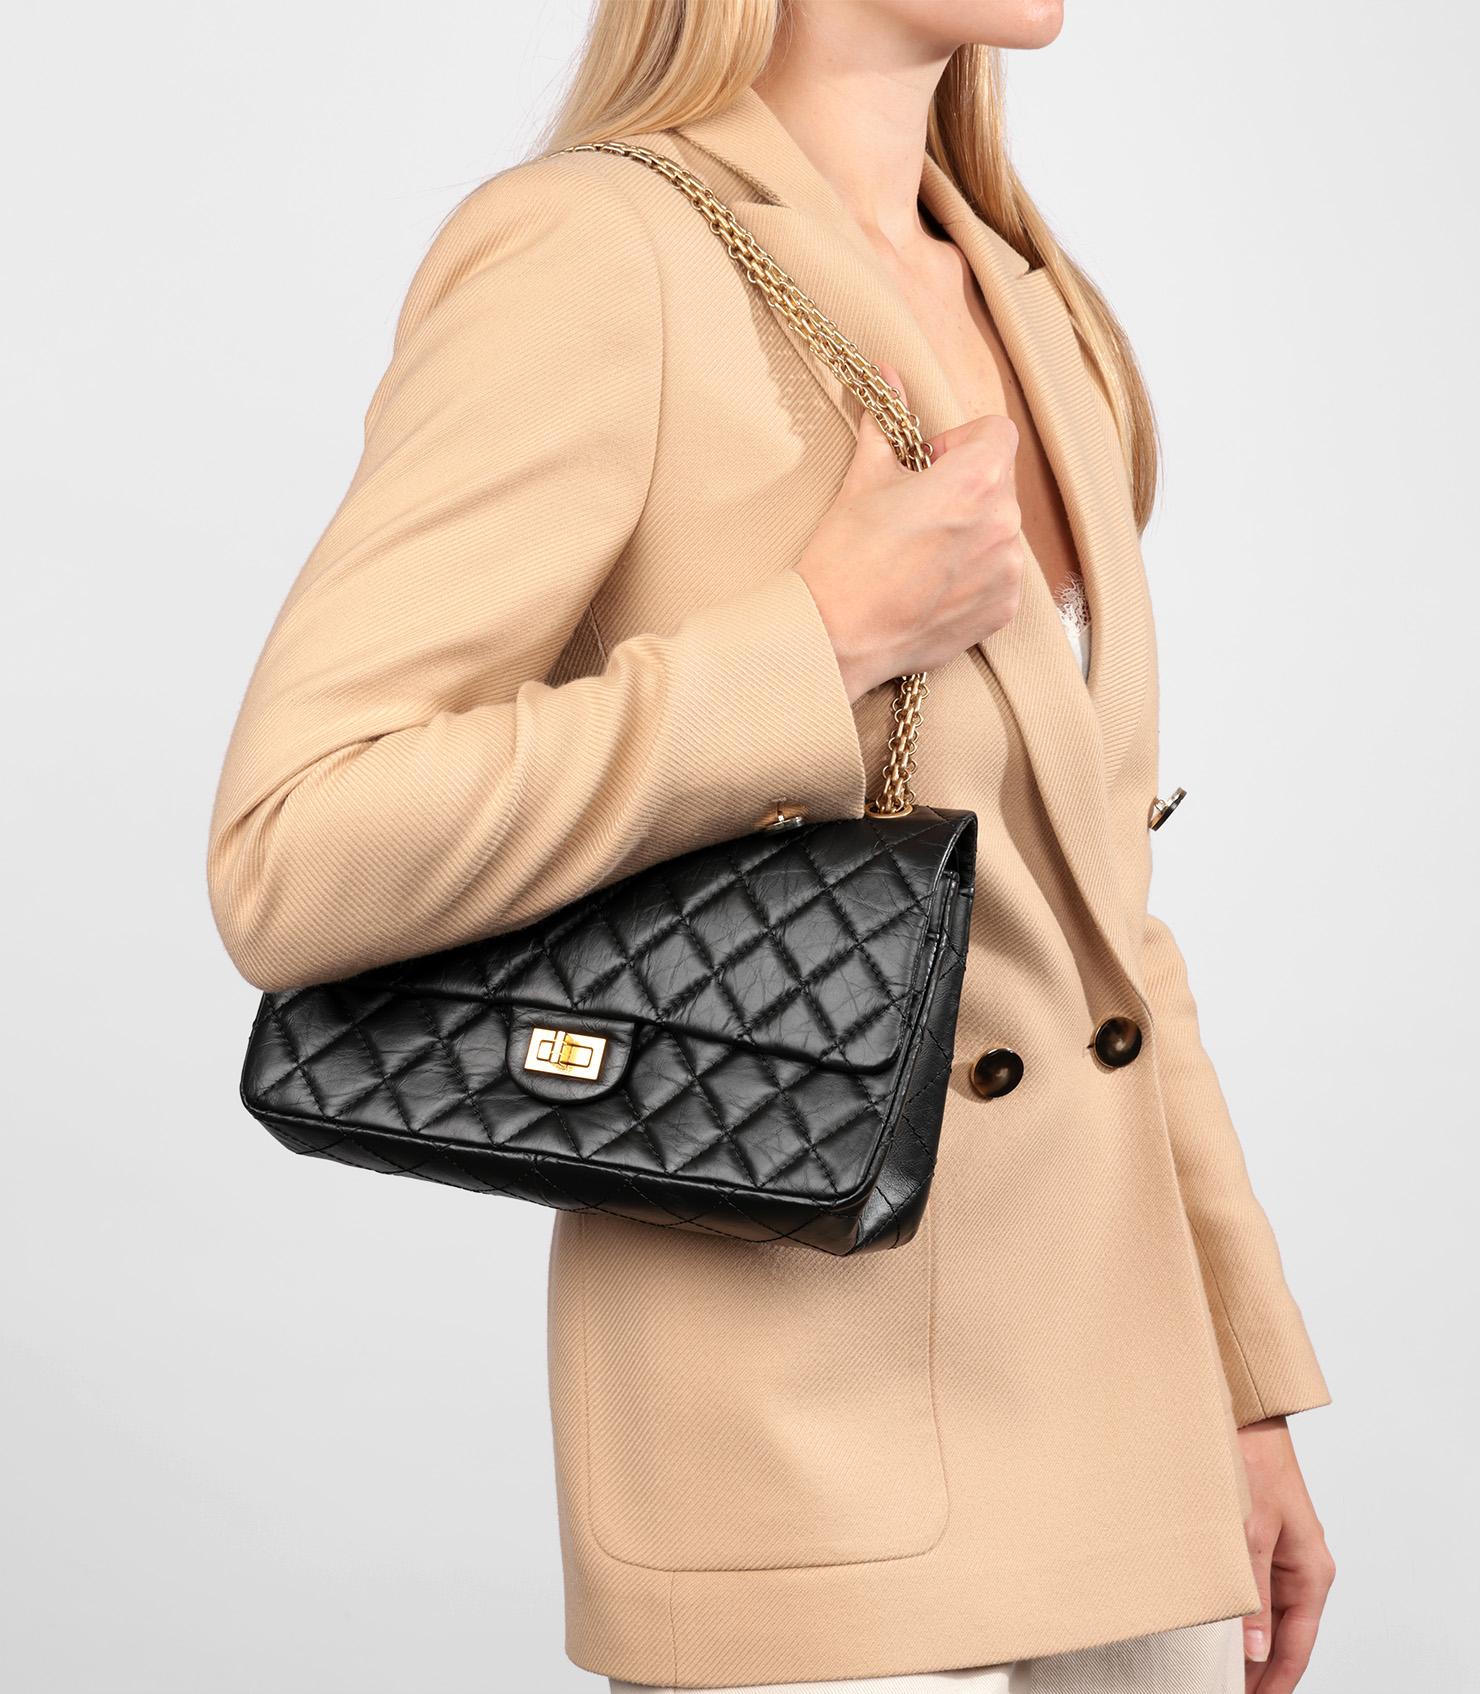 Chanel Black Quilted Crinkled Calfskin Leather 226 2.55 Reissue Double Flap Bag

Brand- Chanel
Model- 226 2.55 Reissue Double Flap Bag
Product Type- Crossbody, Shoulder
Serial Number- 21******
Age- Circa 2015
Accompanied By- Chanel Dust Bag, Box,